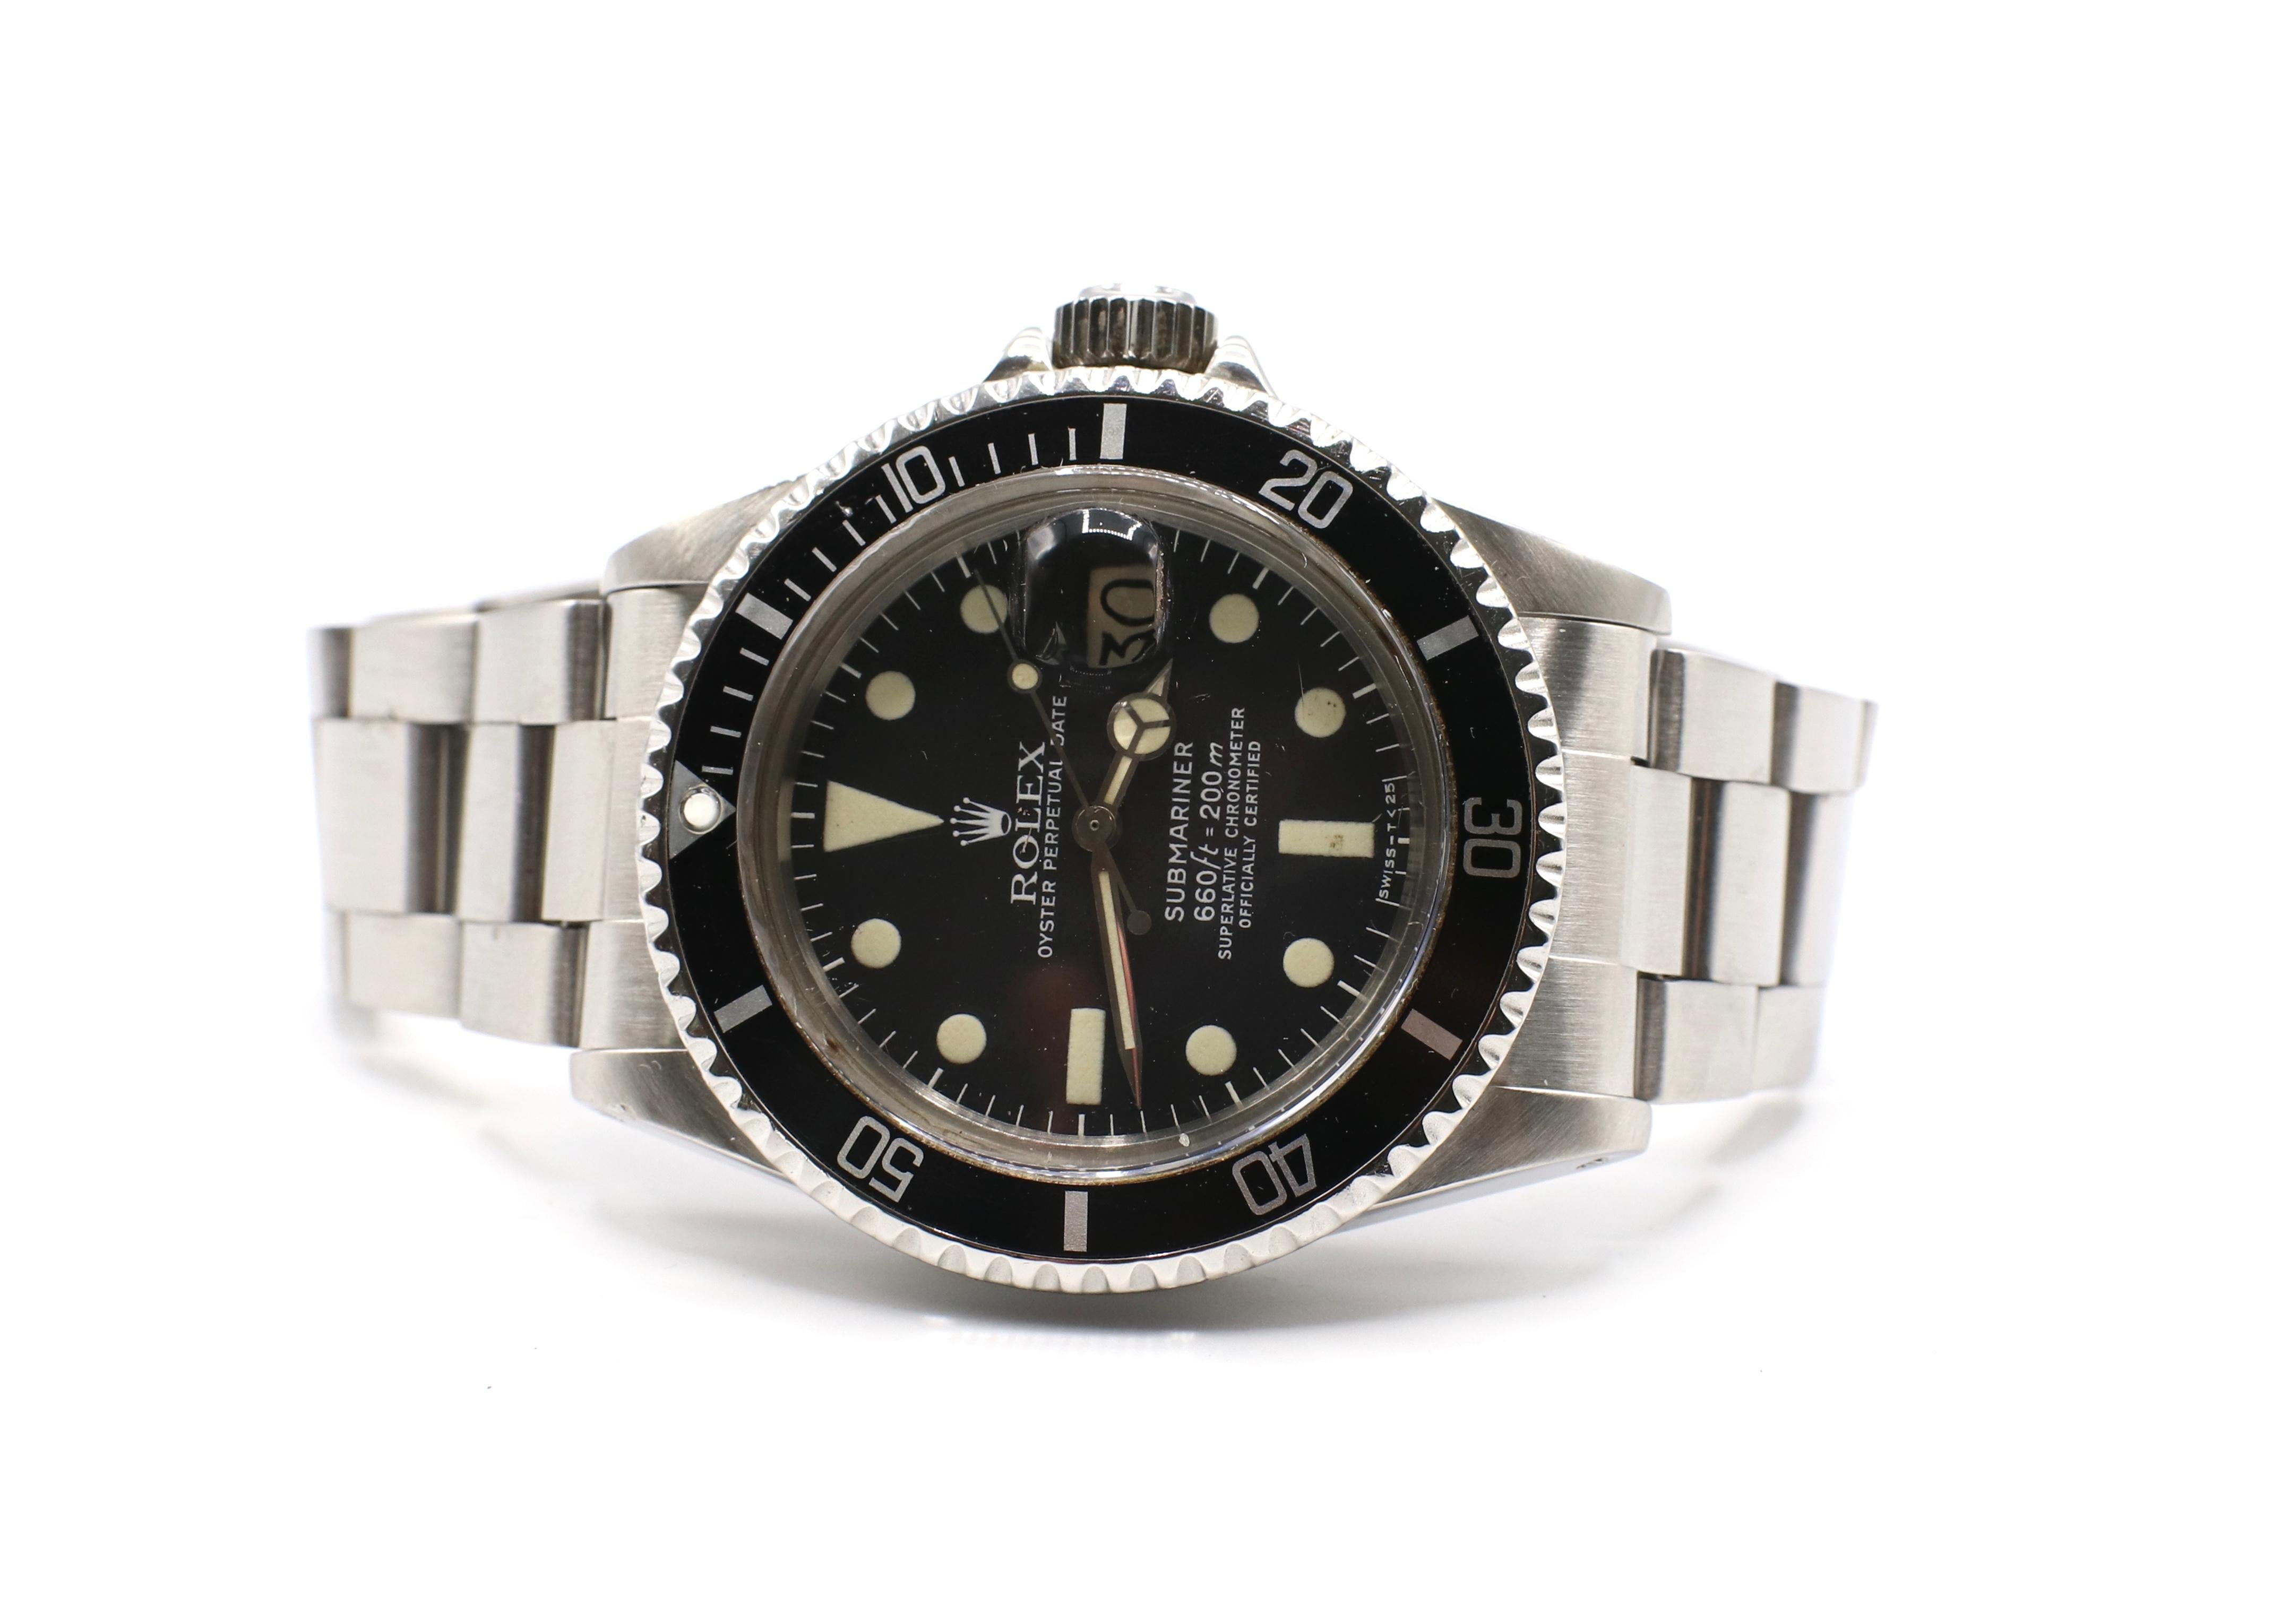 Vintage Rolex Submariner 1680S Stainless Steel Watch 

Model: 1680S
Serial: 616****
Case: 40mm
Metal: Stainless Steel
Bracelet: Stainless Steel
Movement: Automatic
Crystal: Acrylic
Hour markers: Creamy 
Year: 1979
Slight scratches to the bezel,